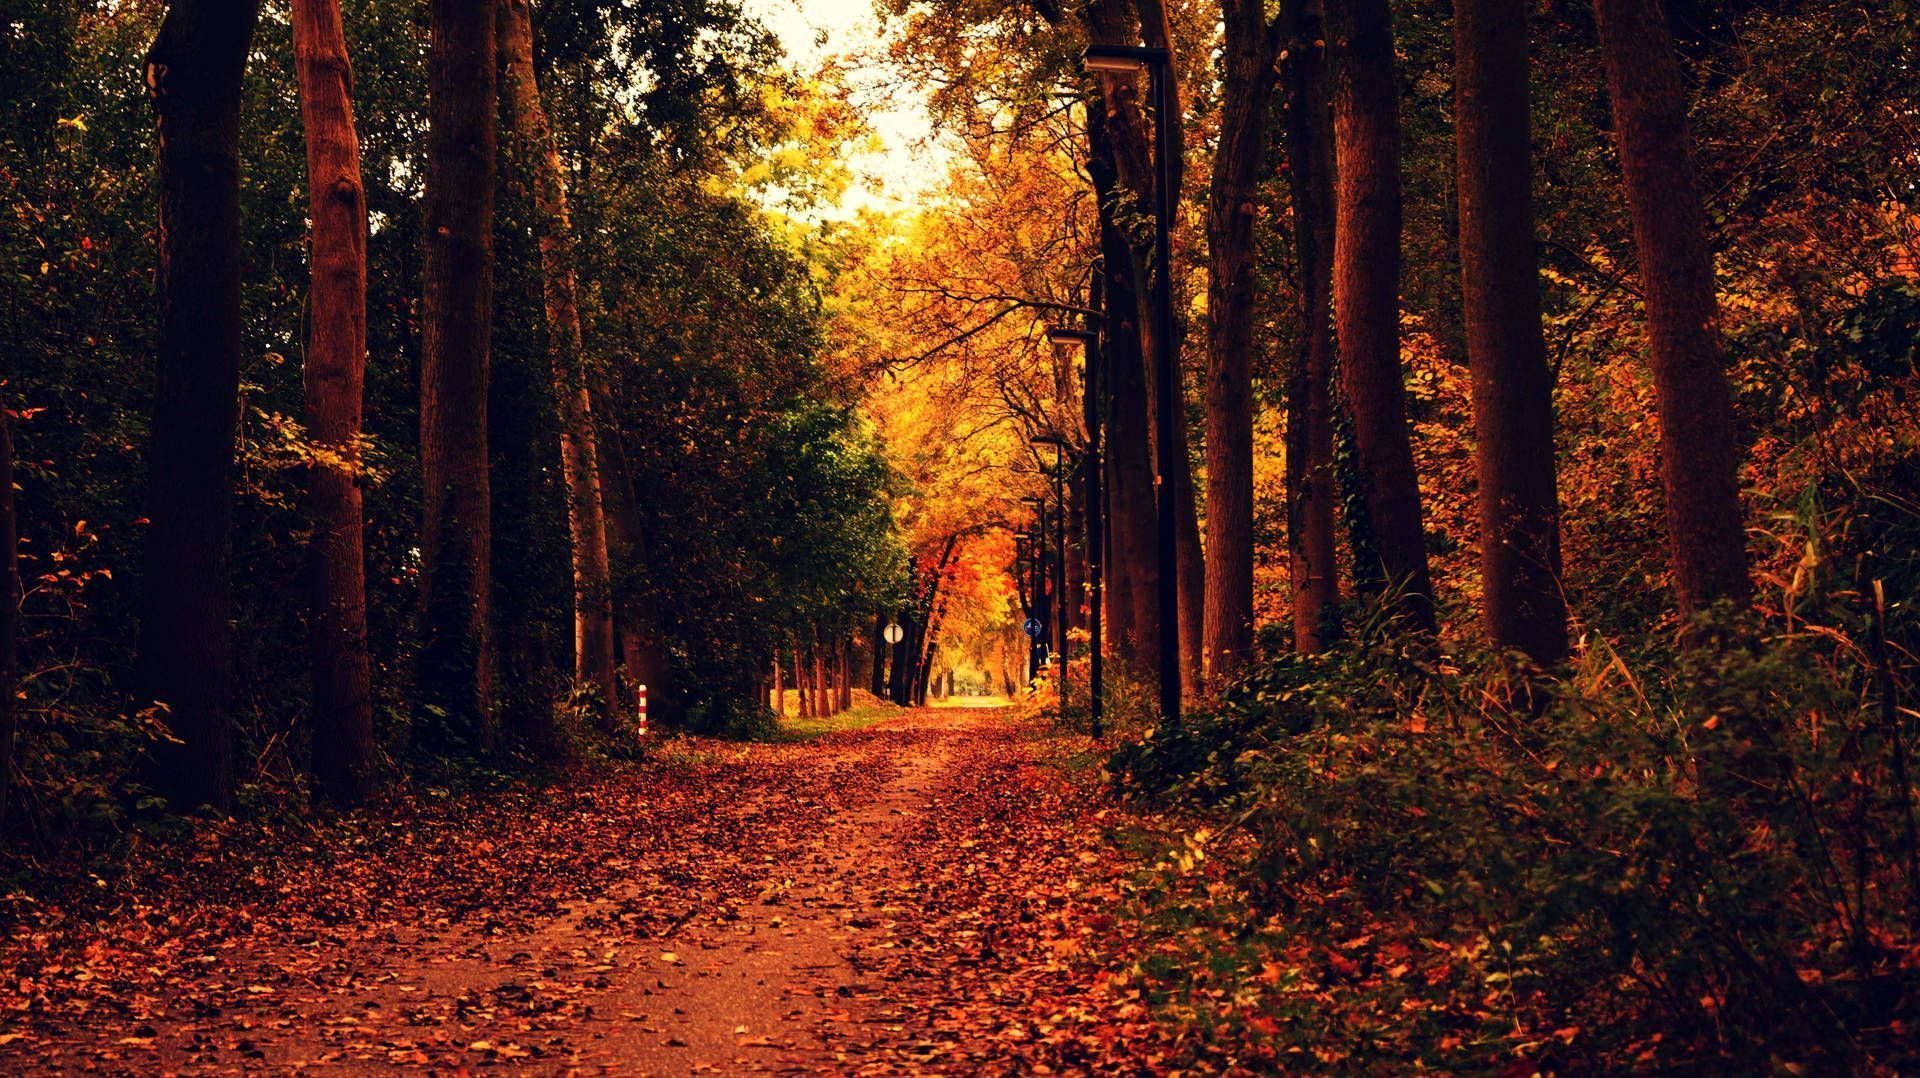 A path in the woods during autumn - Woods